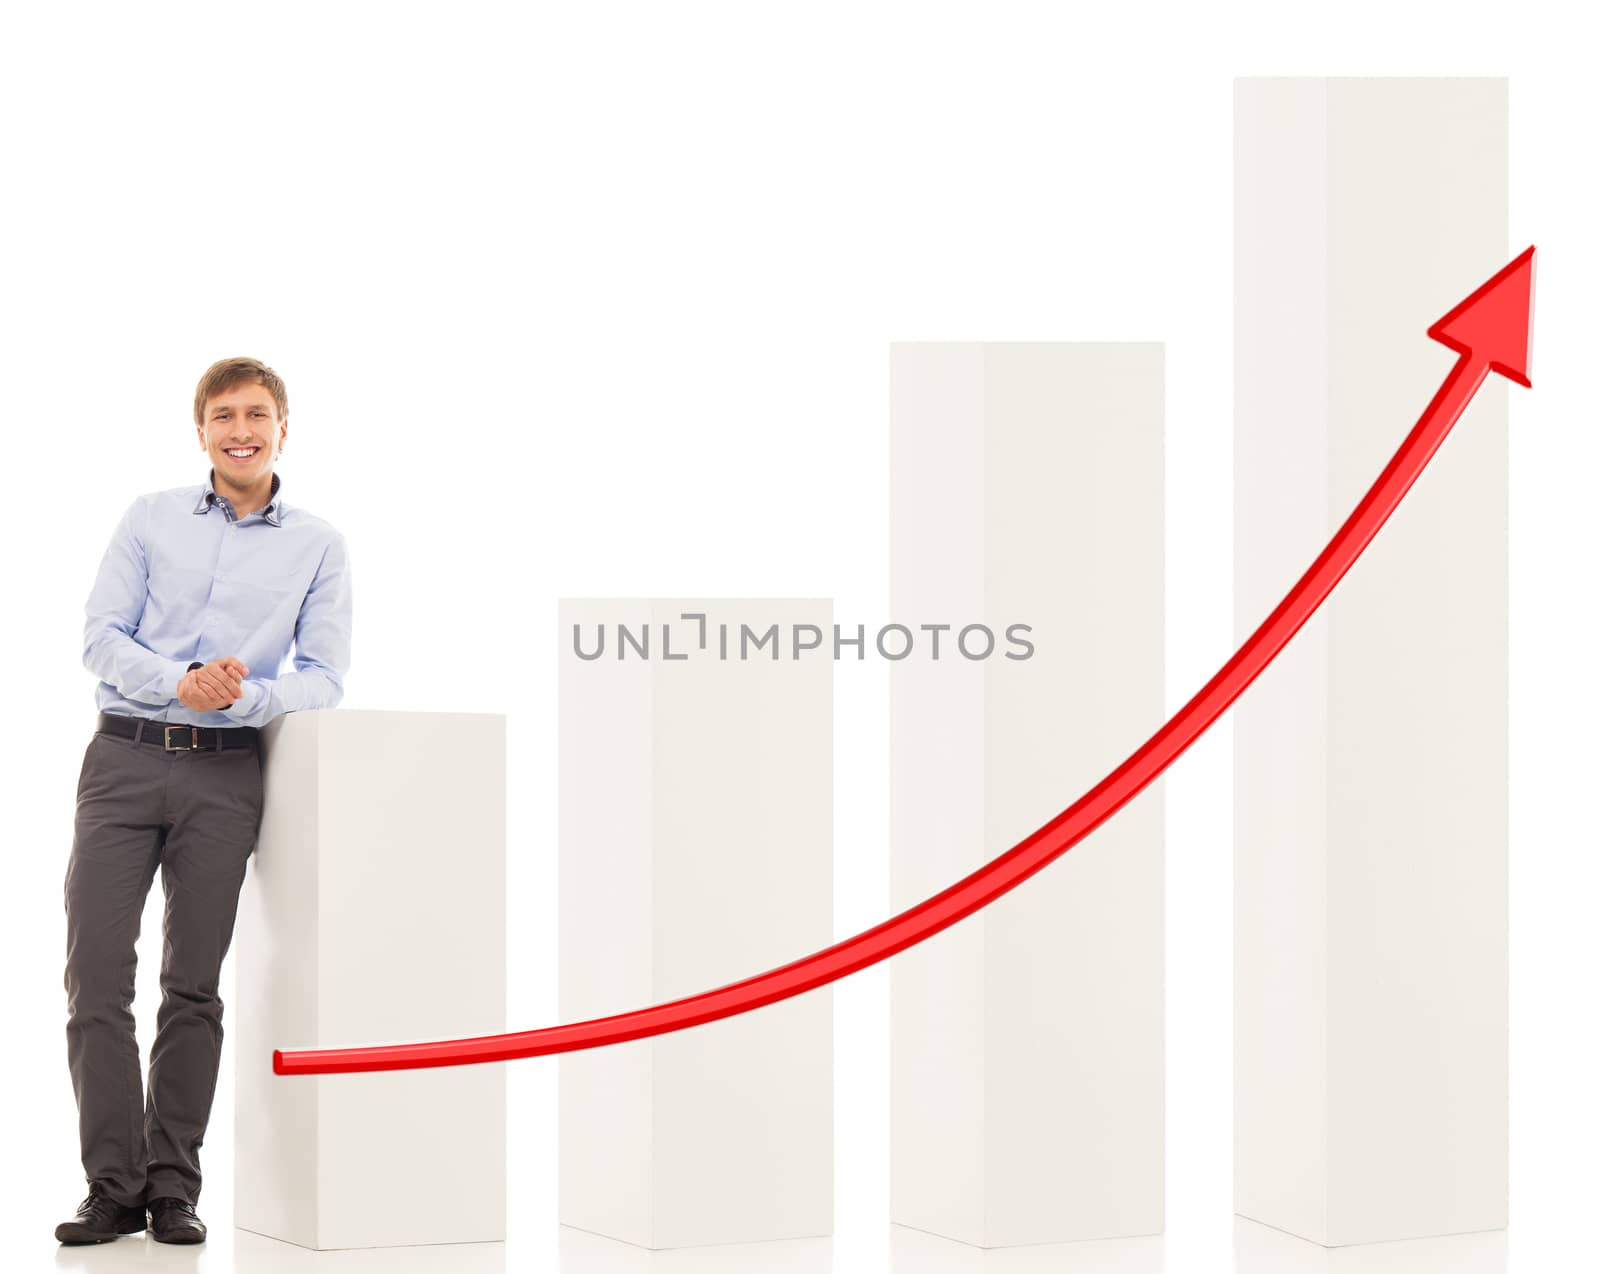 Handsome man in blue shirt and trousers stands next to a diagram that shows income